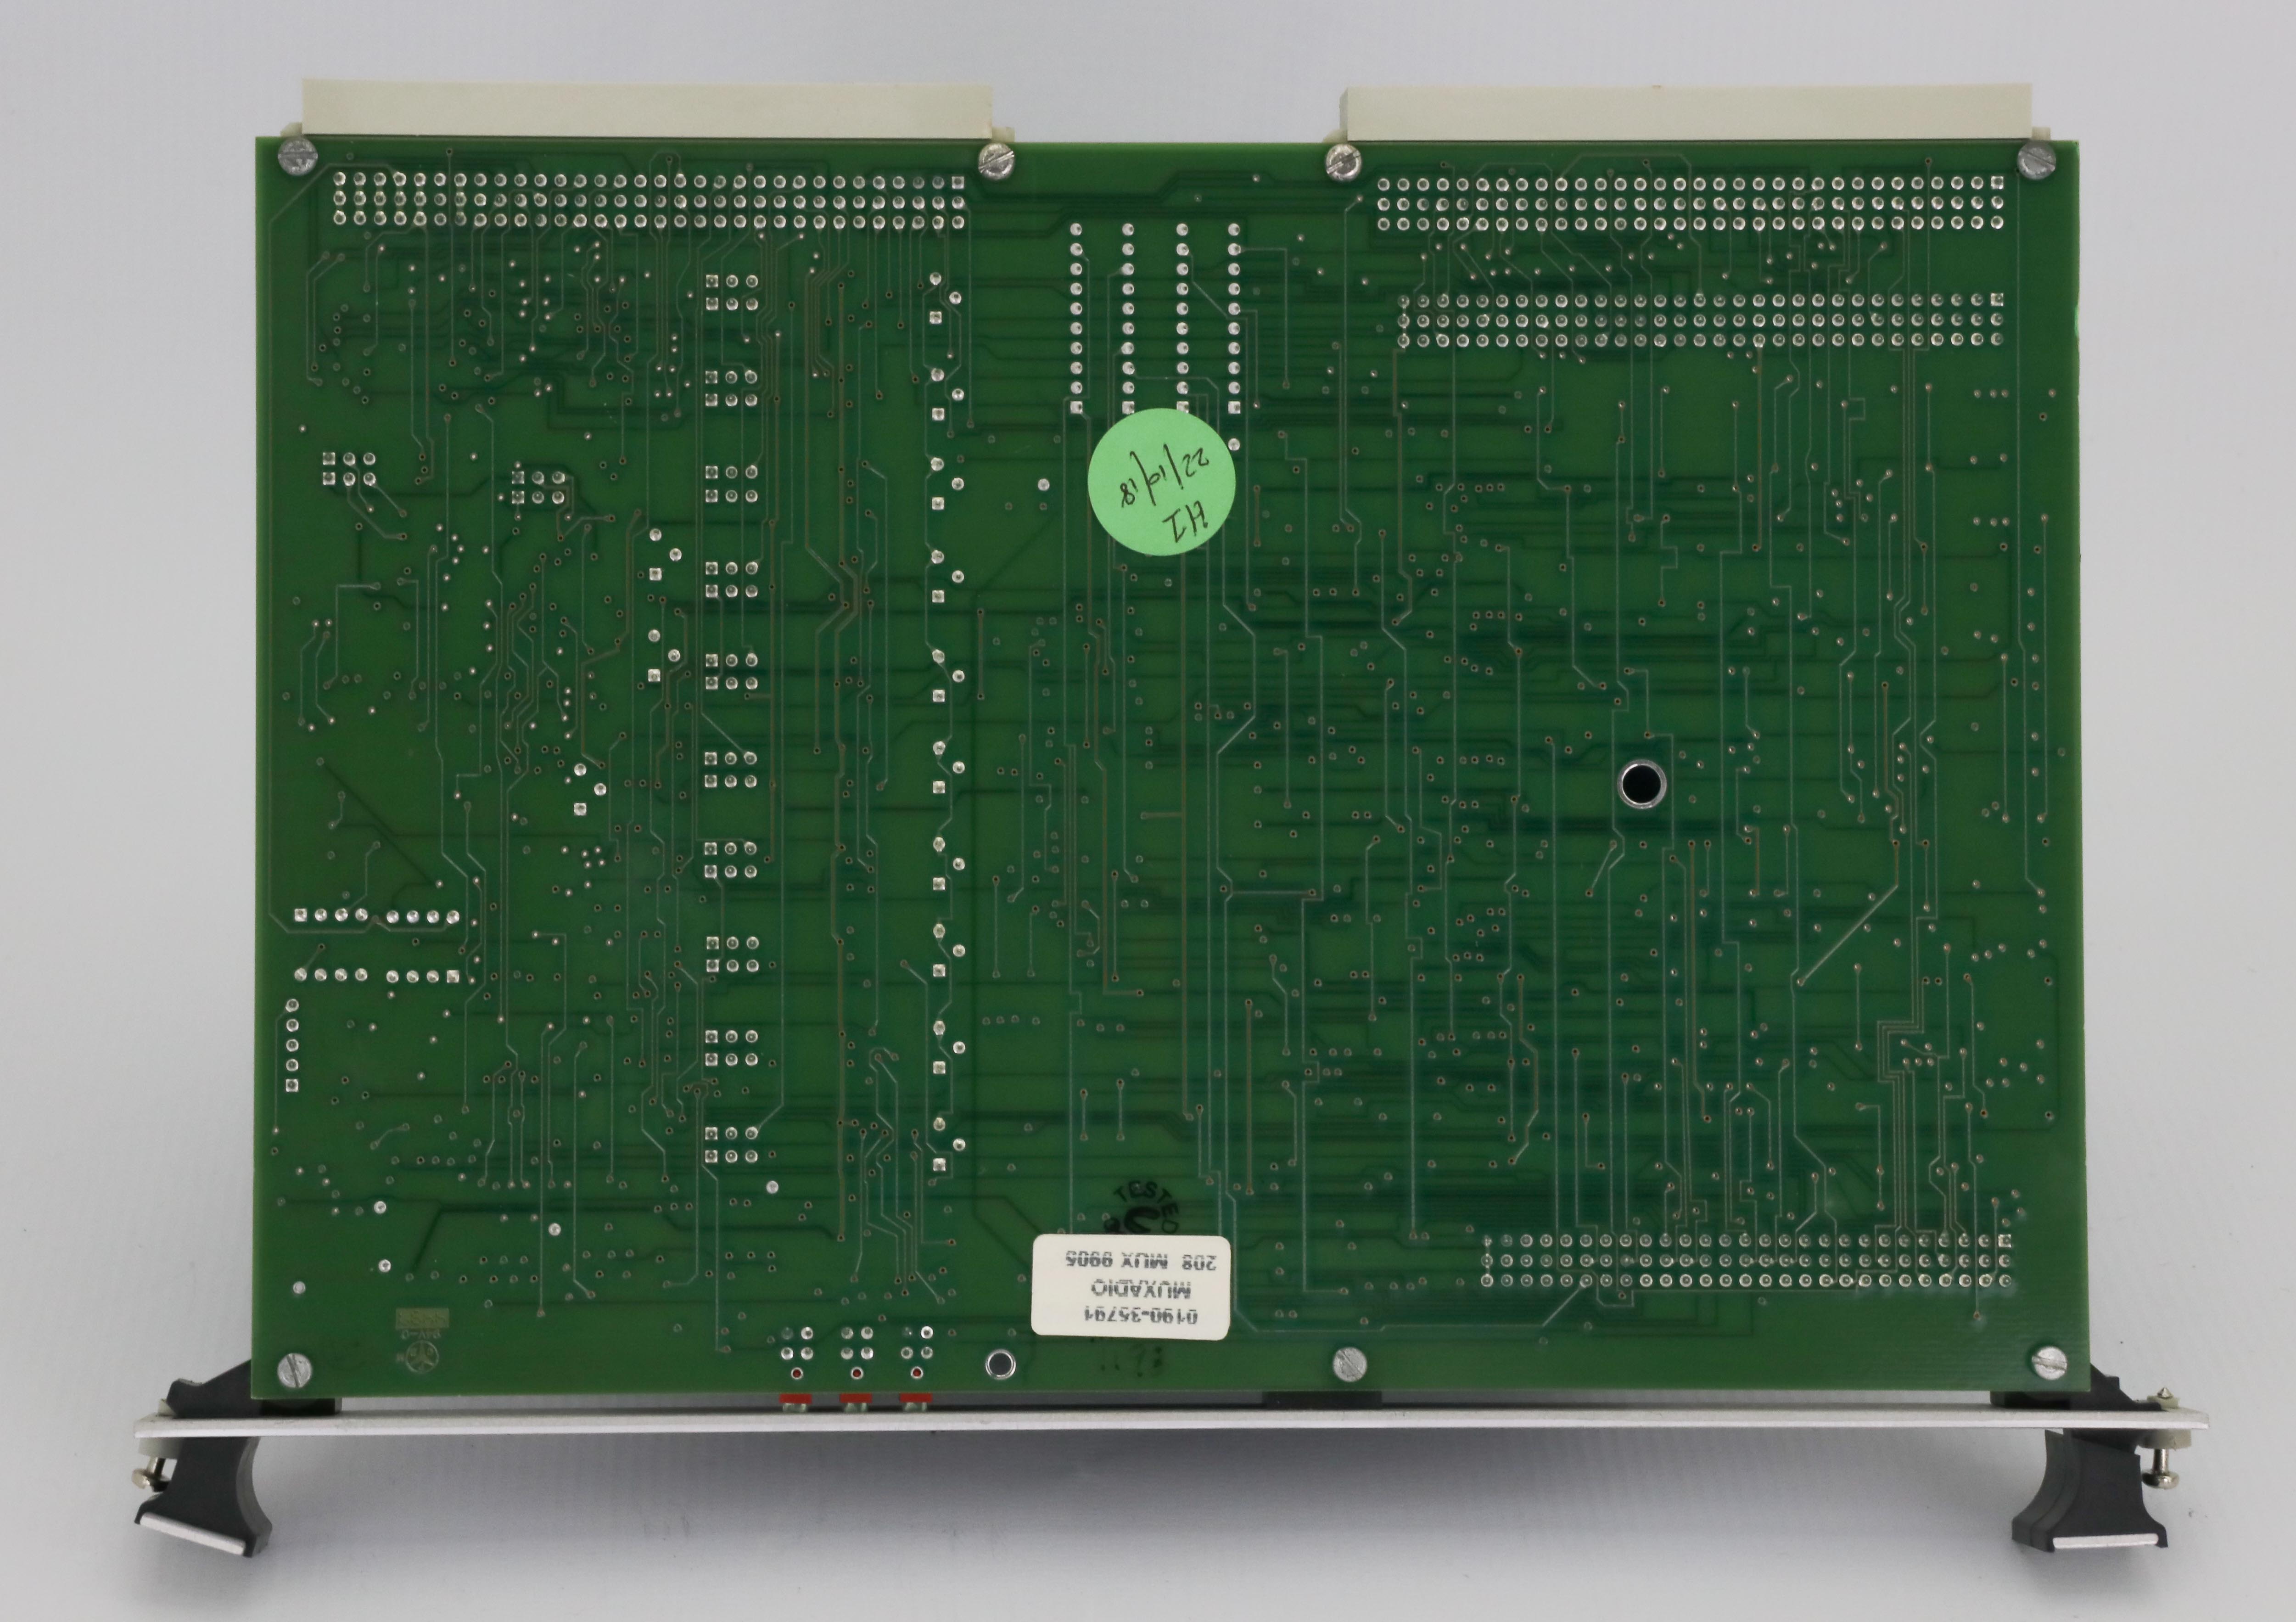 12722-applied-materials-assy-apc-card-0100-09251-j316gallery